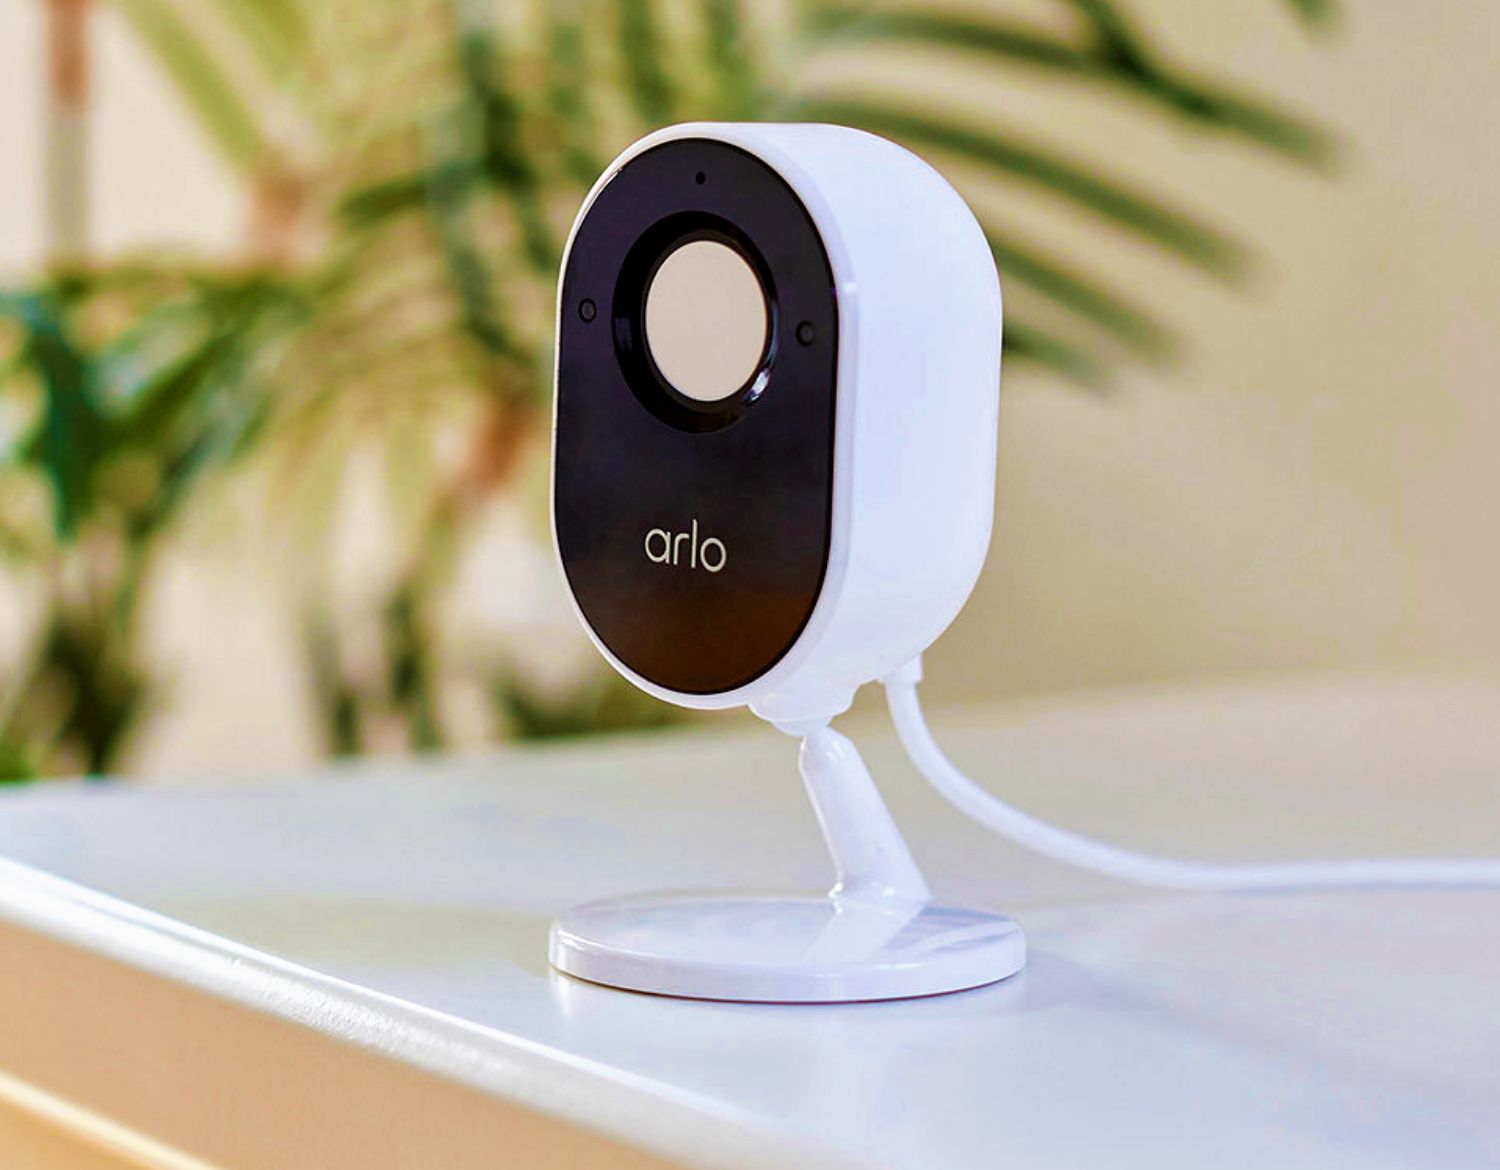 An Arlo Essential Indoor security camera placed on a shelf, captures live action and has a privacy shield which can be closed when set to disarm mode